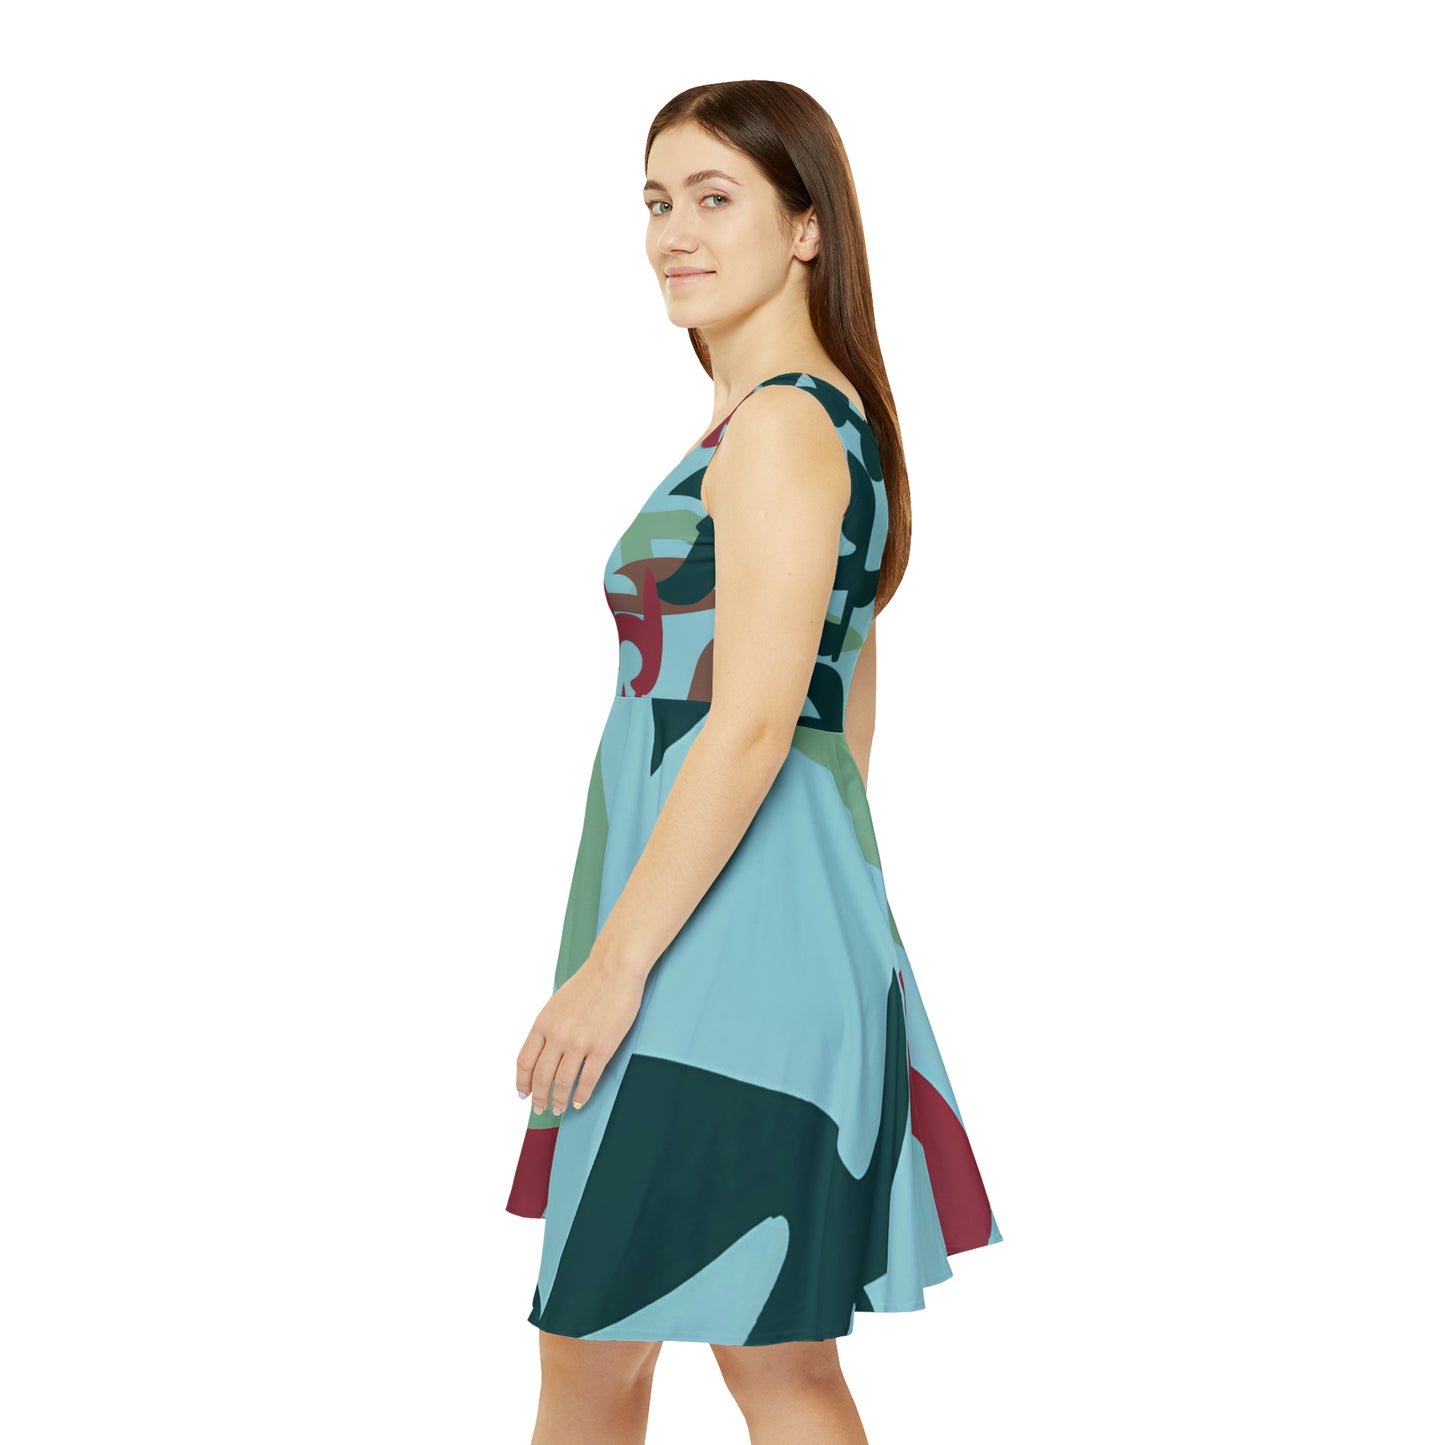 Chaparral Ione - Women's Skater Dress